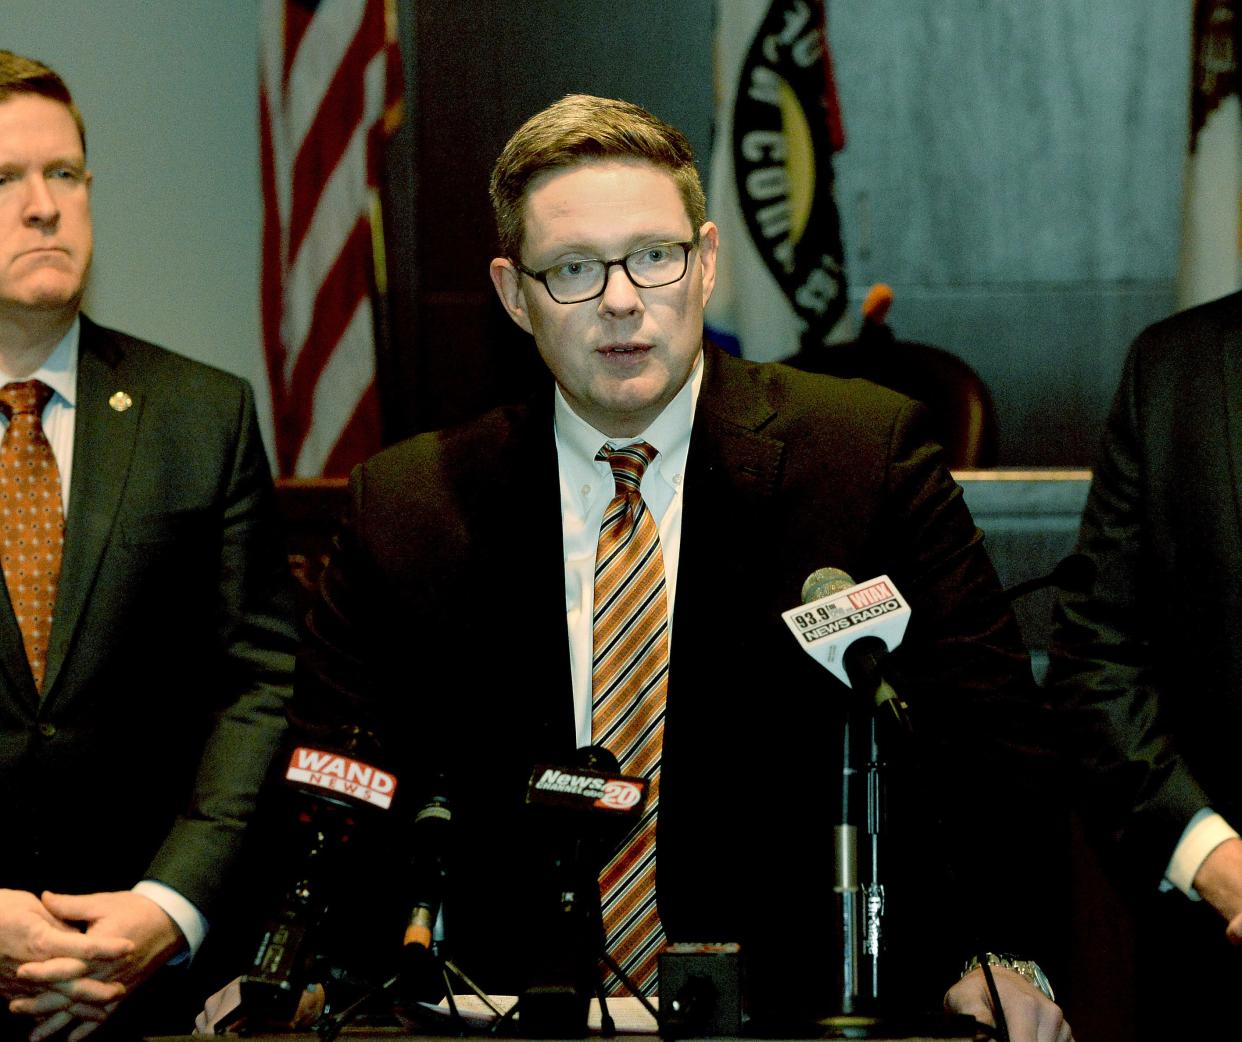 Sangamon County State's Attorney Dan Wright speaks during a press conference Tuesday at the Sangamon County complex. Wright's office filed first-degree murder charges against two LifeStar emergency medical technicians in the death of Earl L. Moore Jr. of Springfield on Dec. 18.